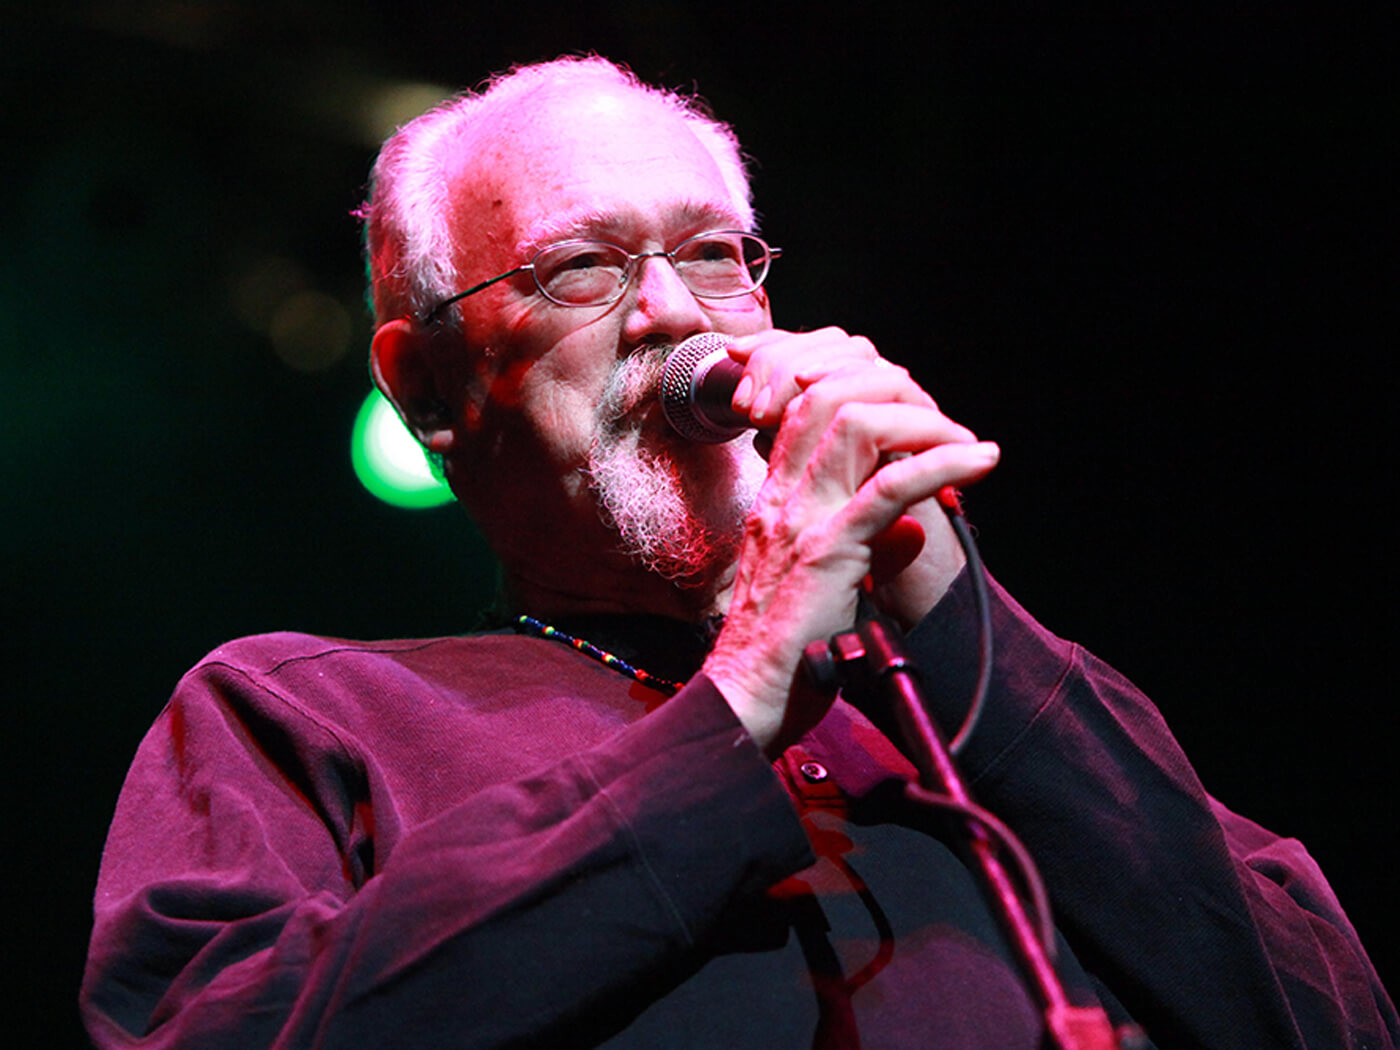 Send us your questions for John Sinclair!